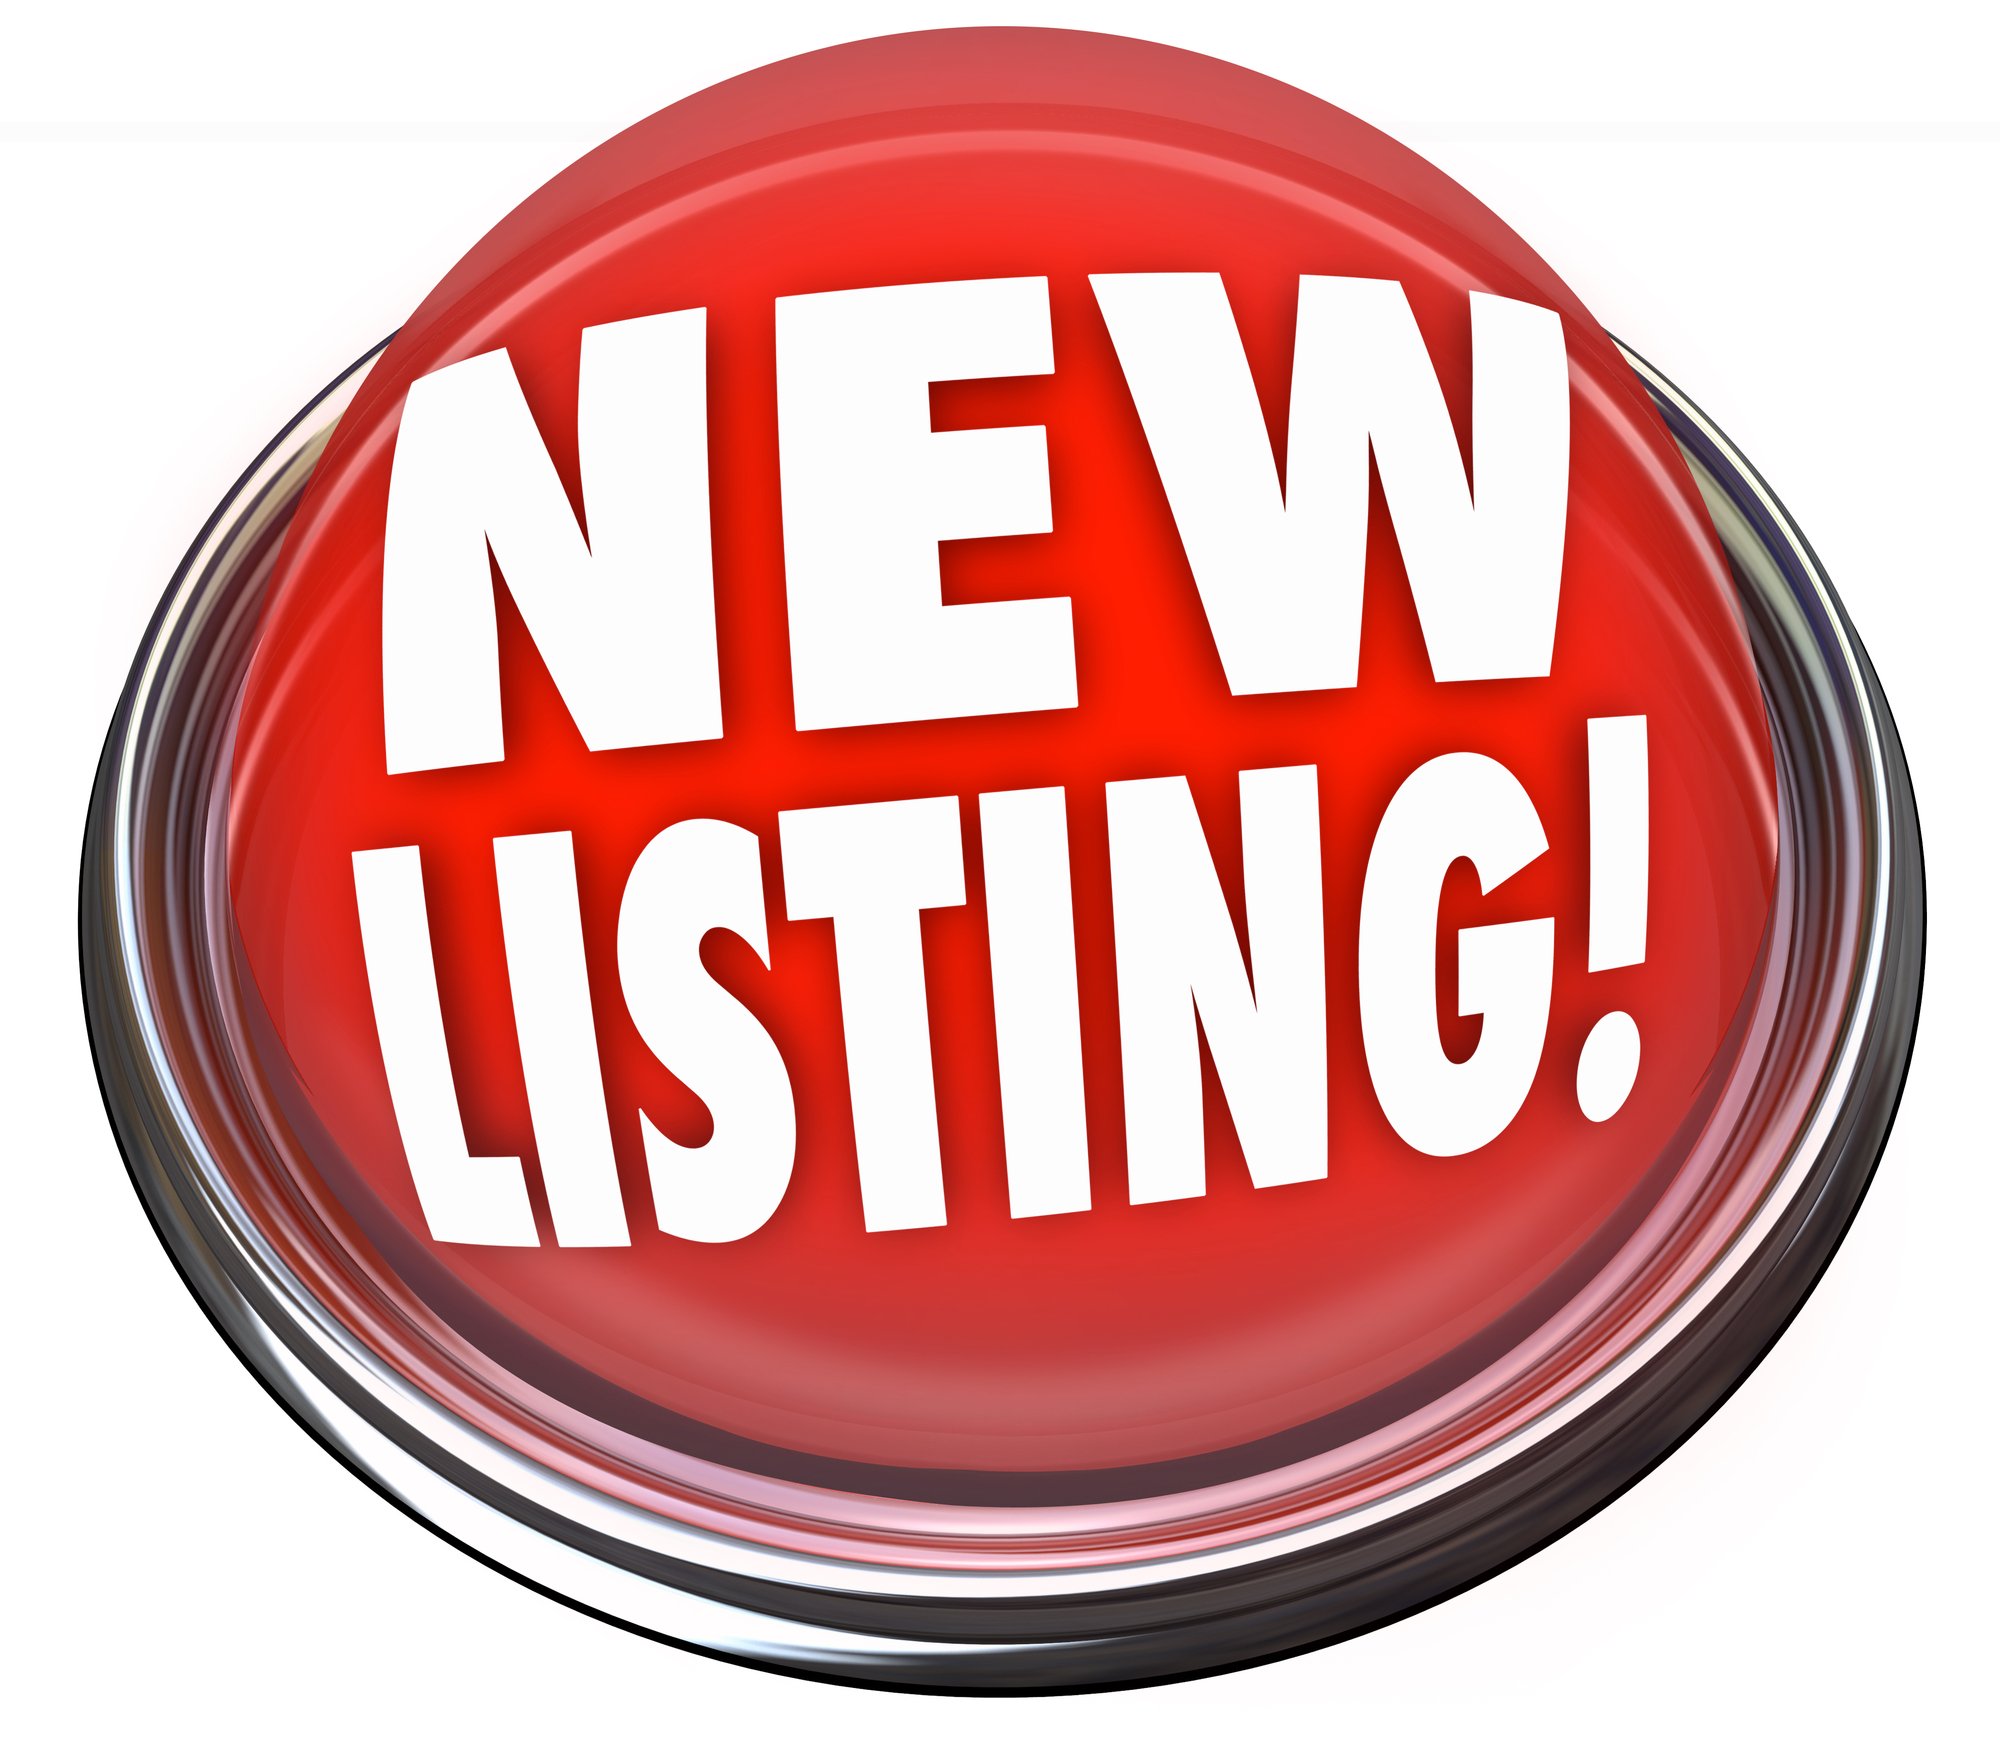 New Listing Button